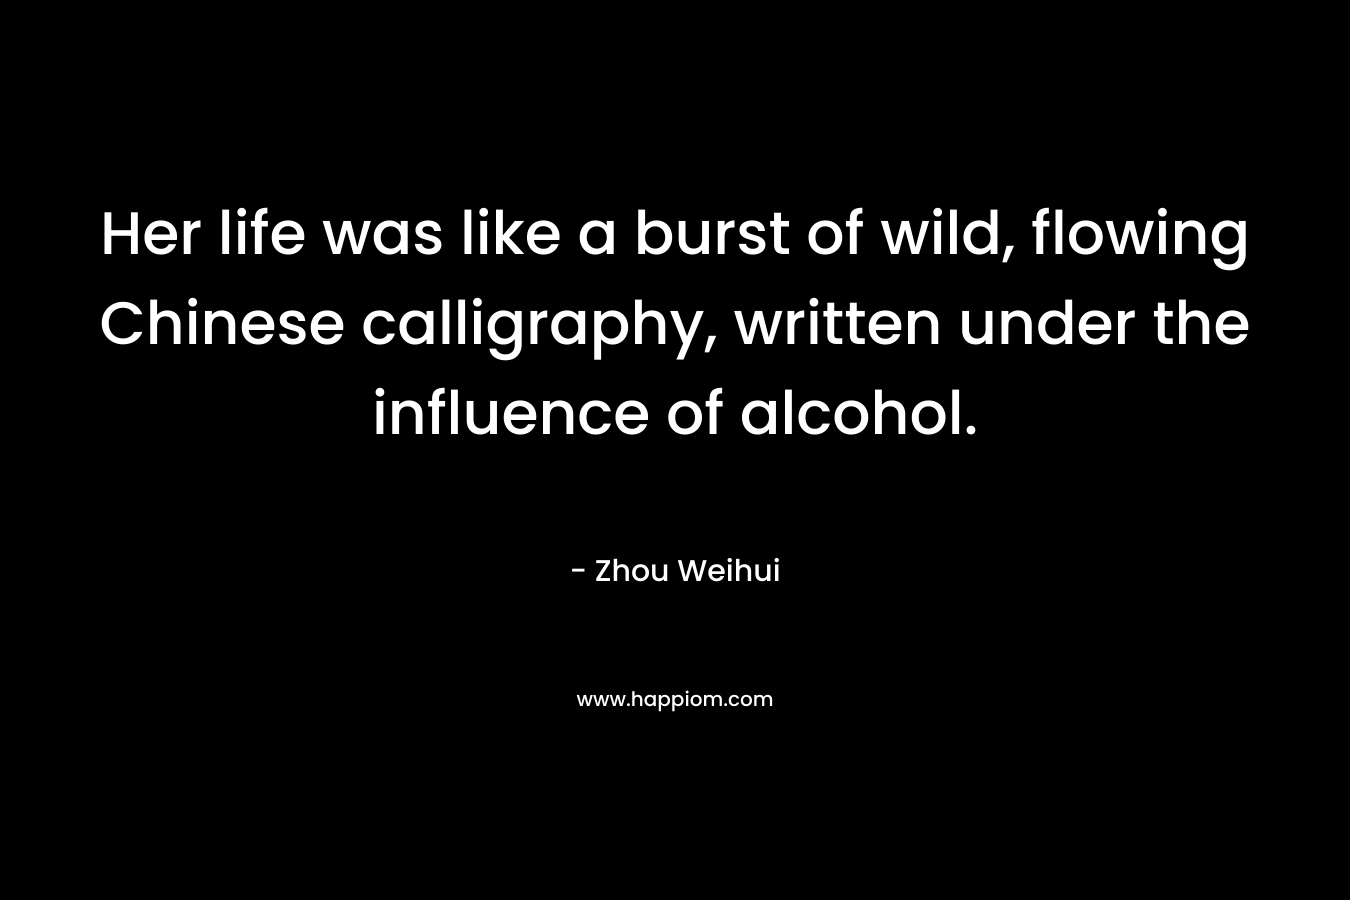 Her life was like a burst of wild, flowing Chinese calligraphy, written under the influence of alcohol.